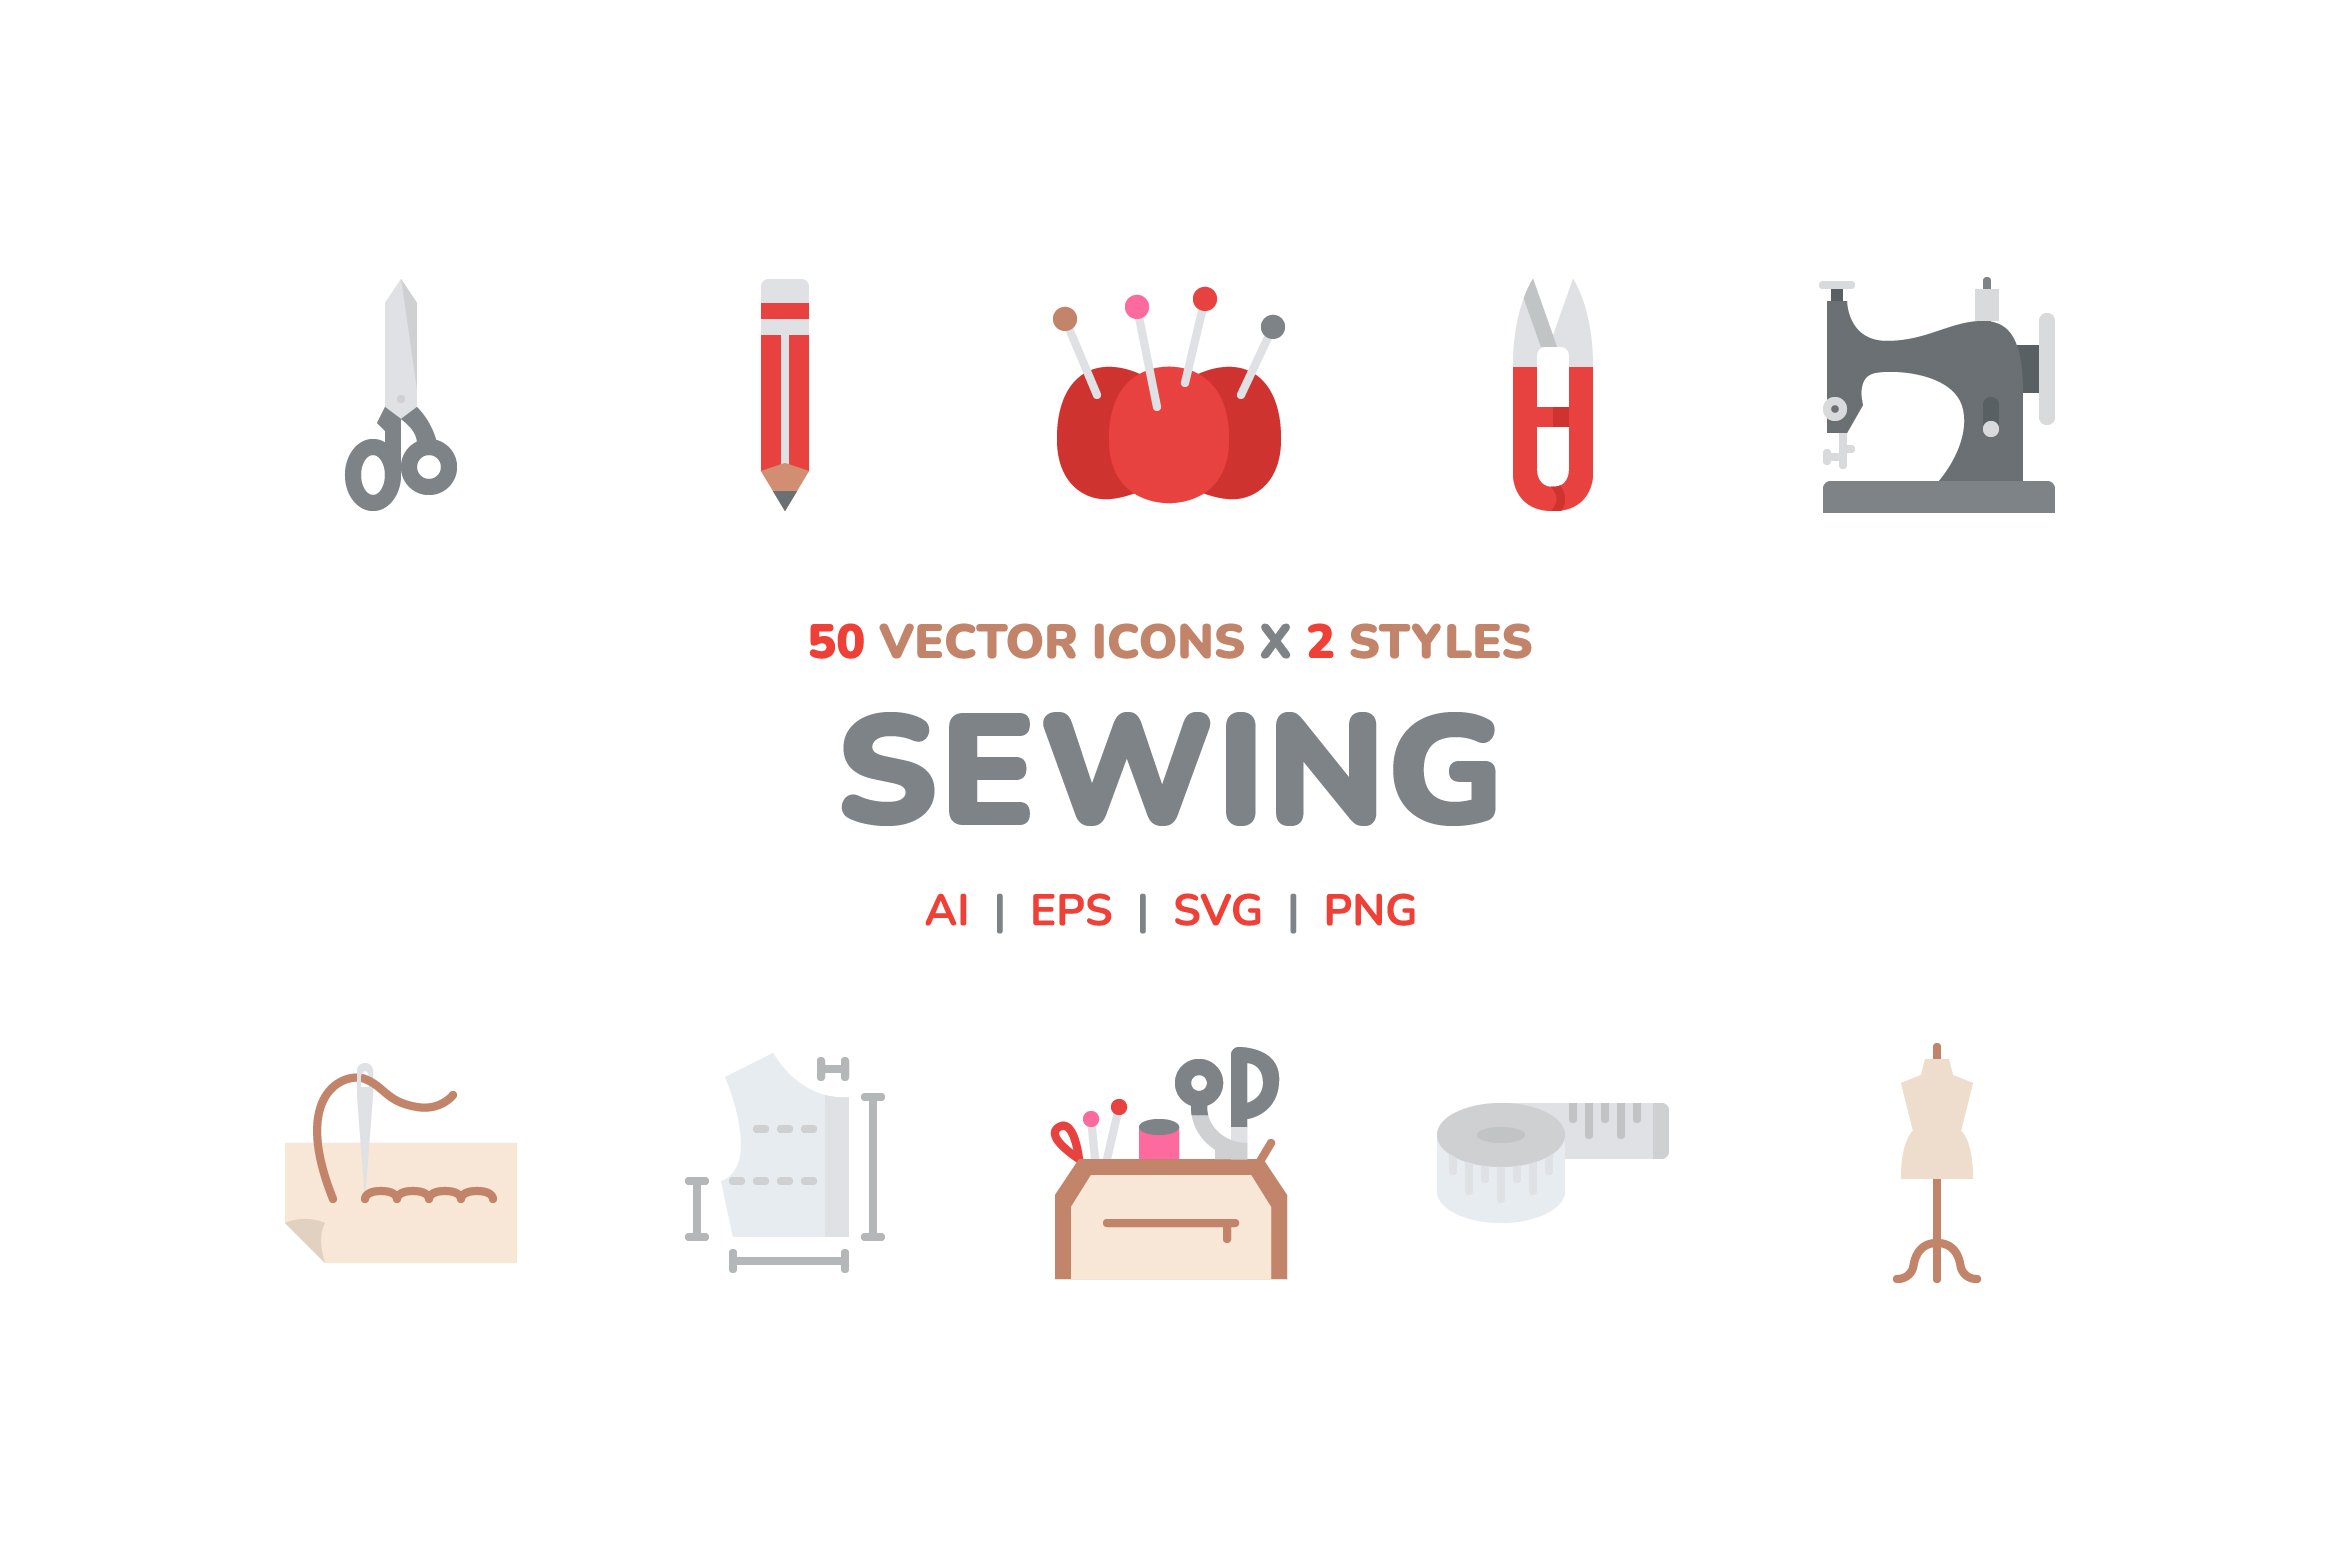 Sewing Icon Pack cover image.